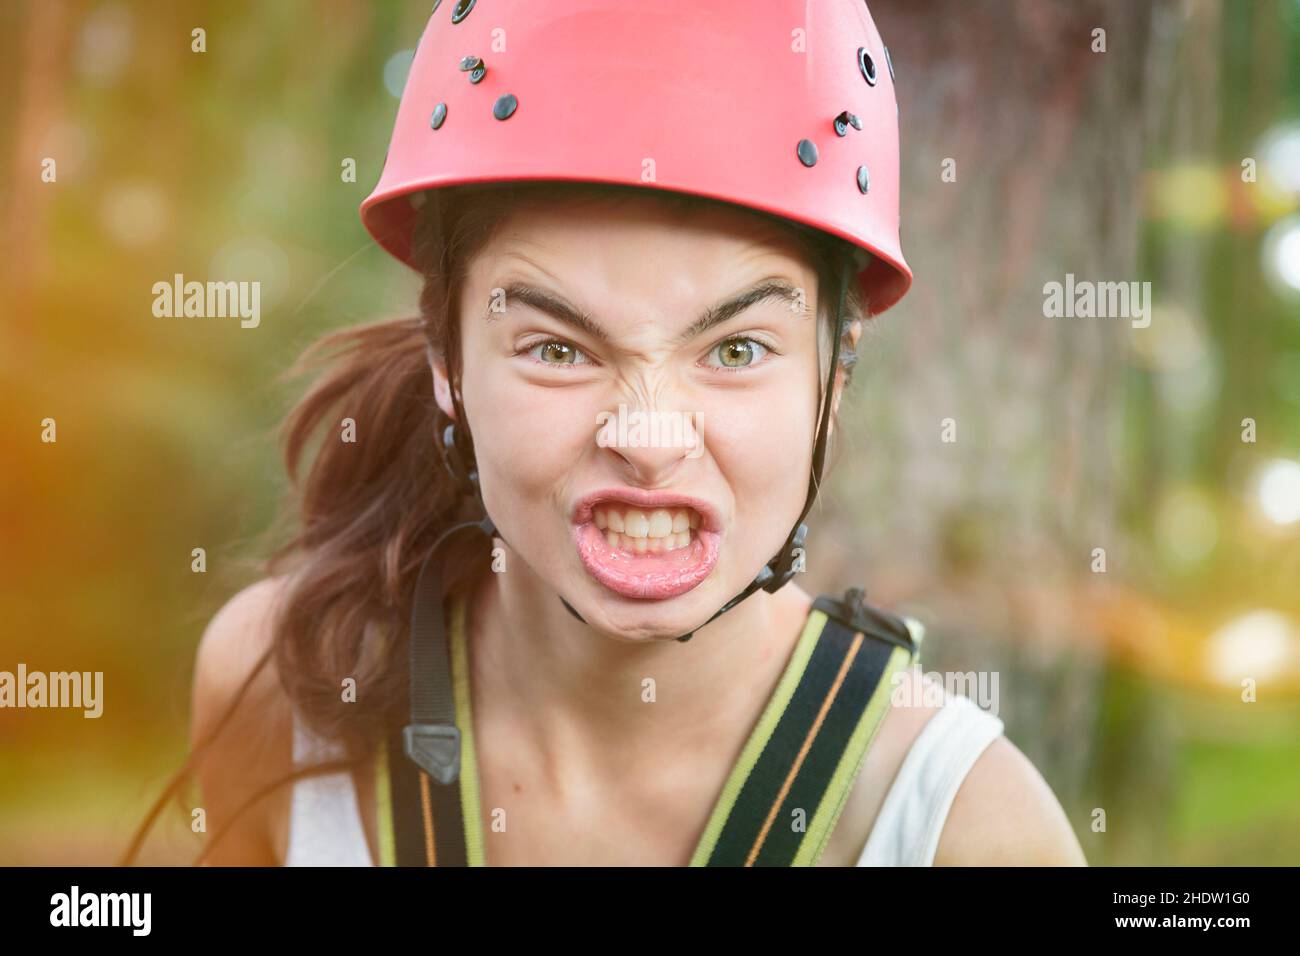 fit, strong, sporting, rock climbing, fits, strongs, fun, living Stock Photo